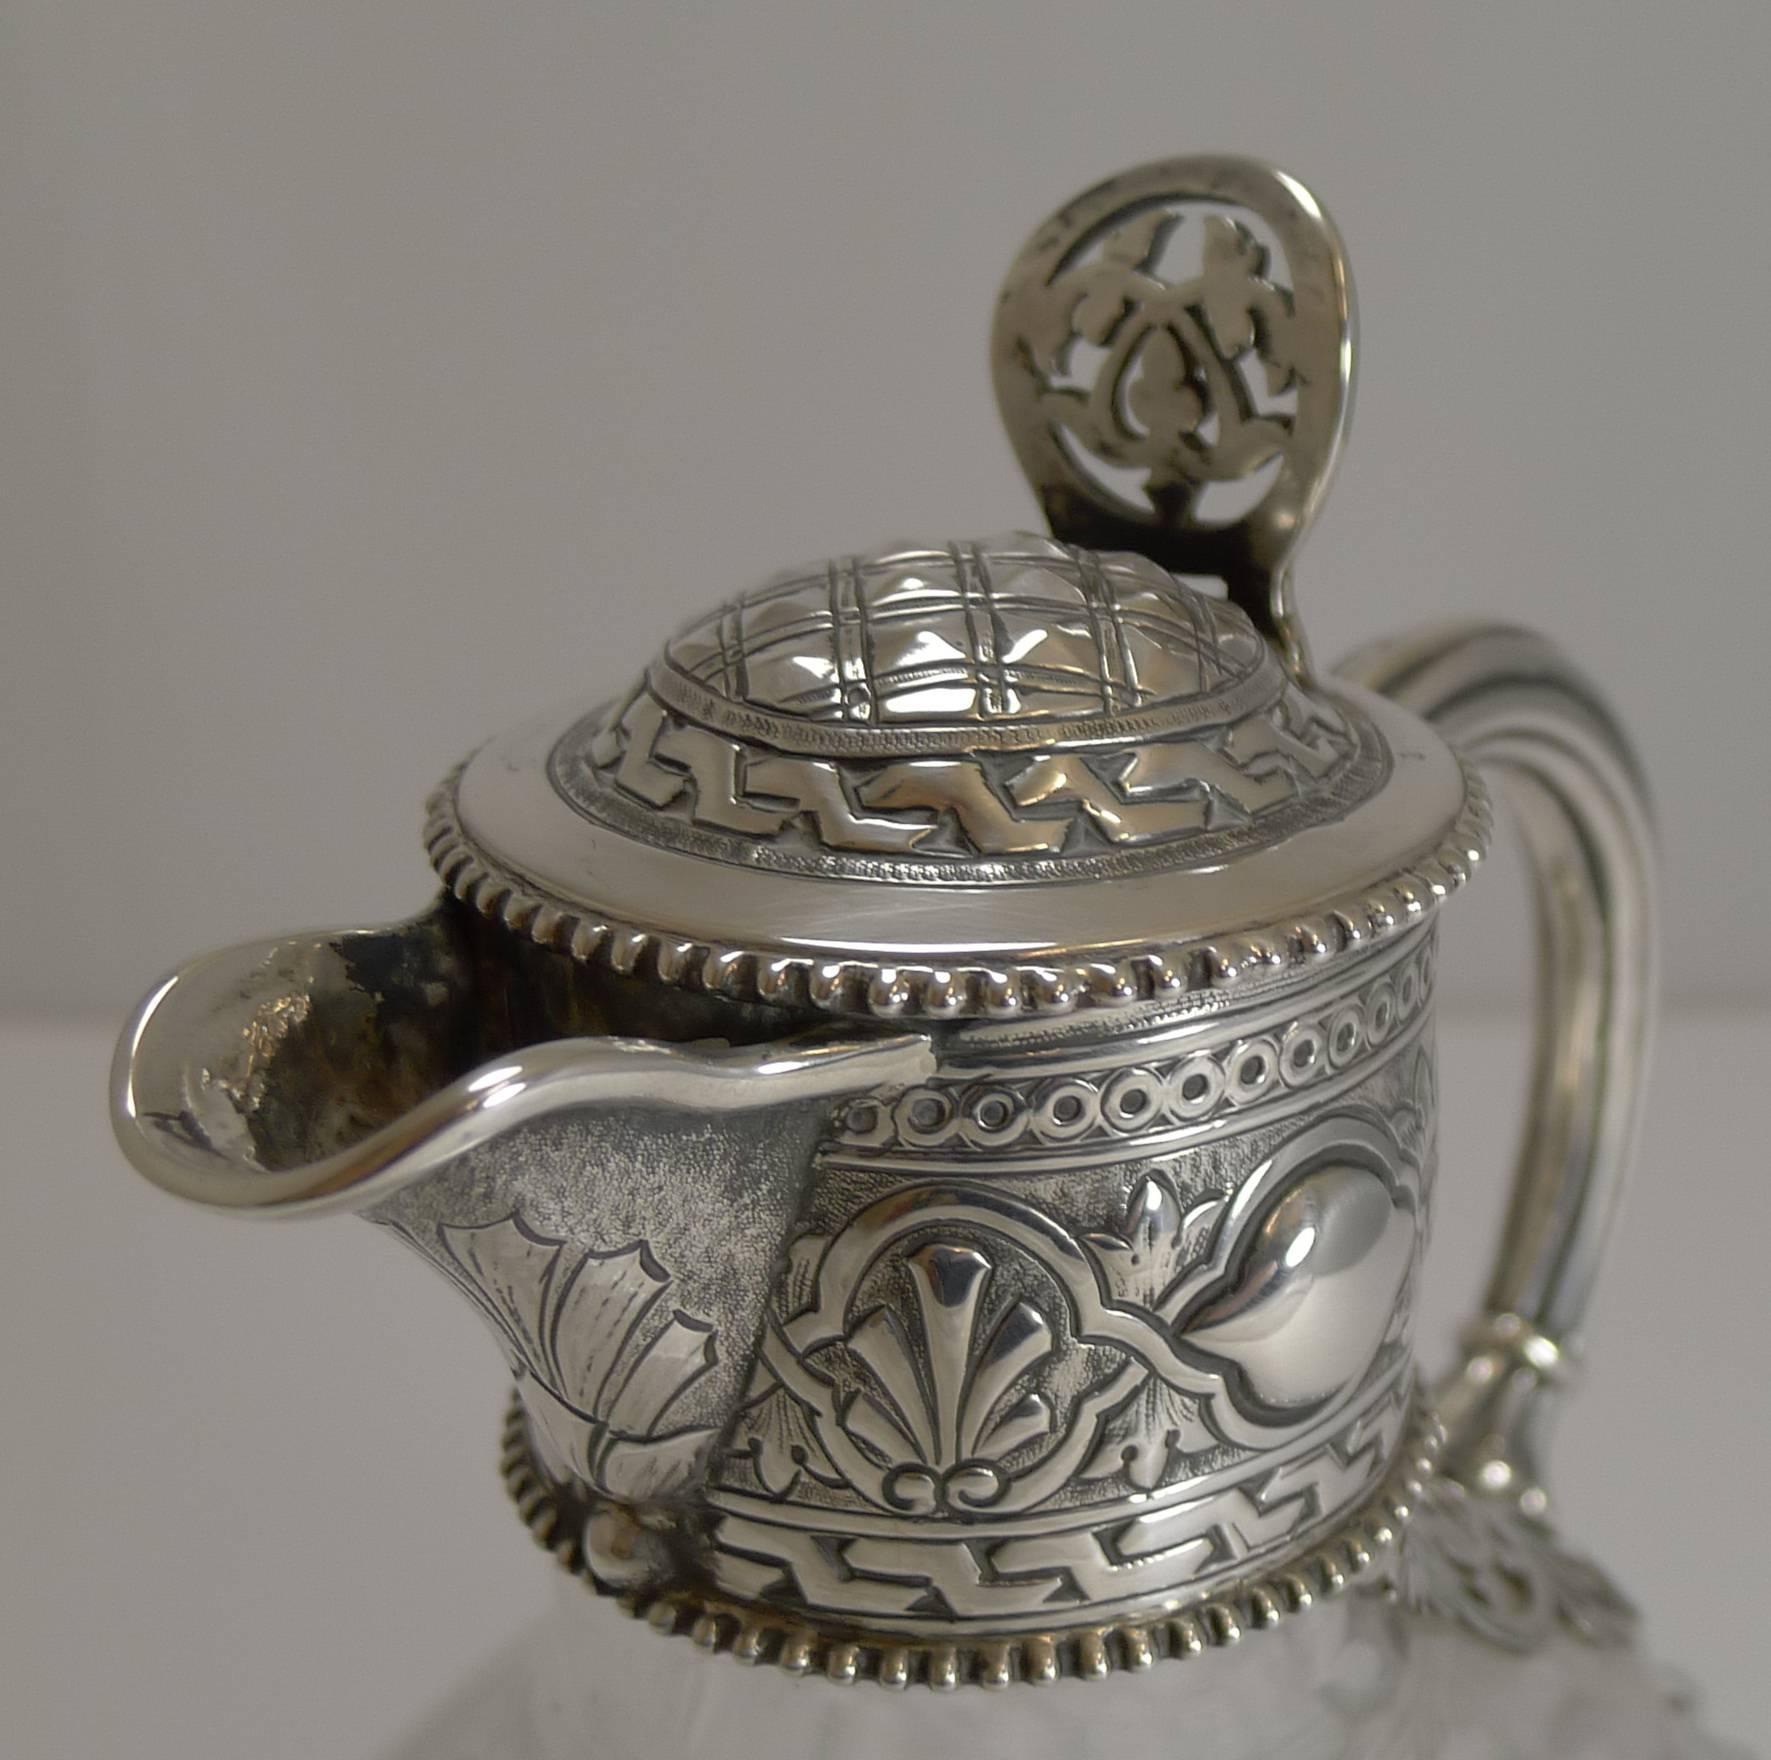 Late Victorian Victorian English Cut Crystal and Sterling Silver Claret or Wine Jug, 1863